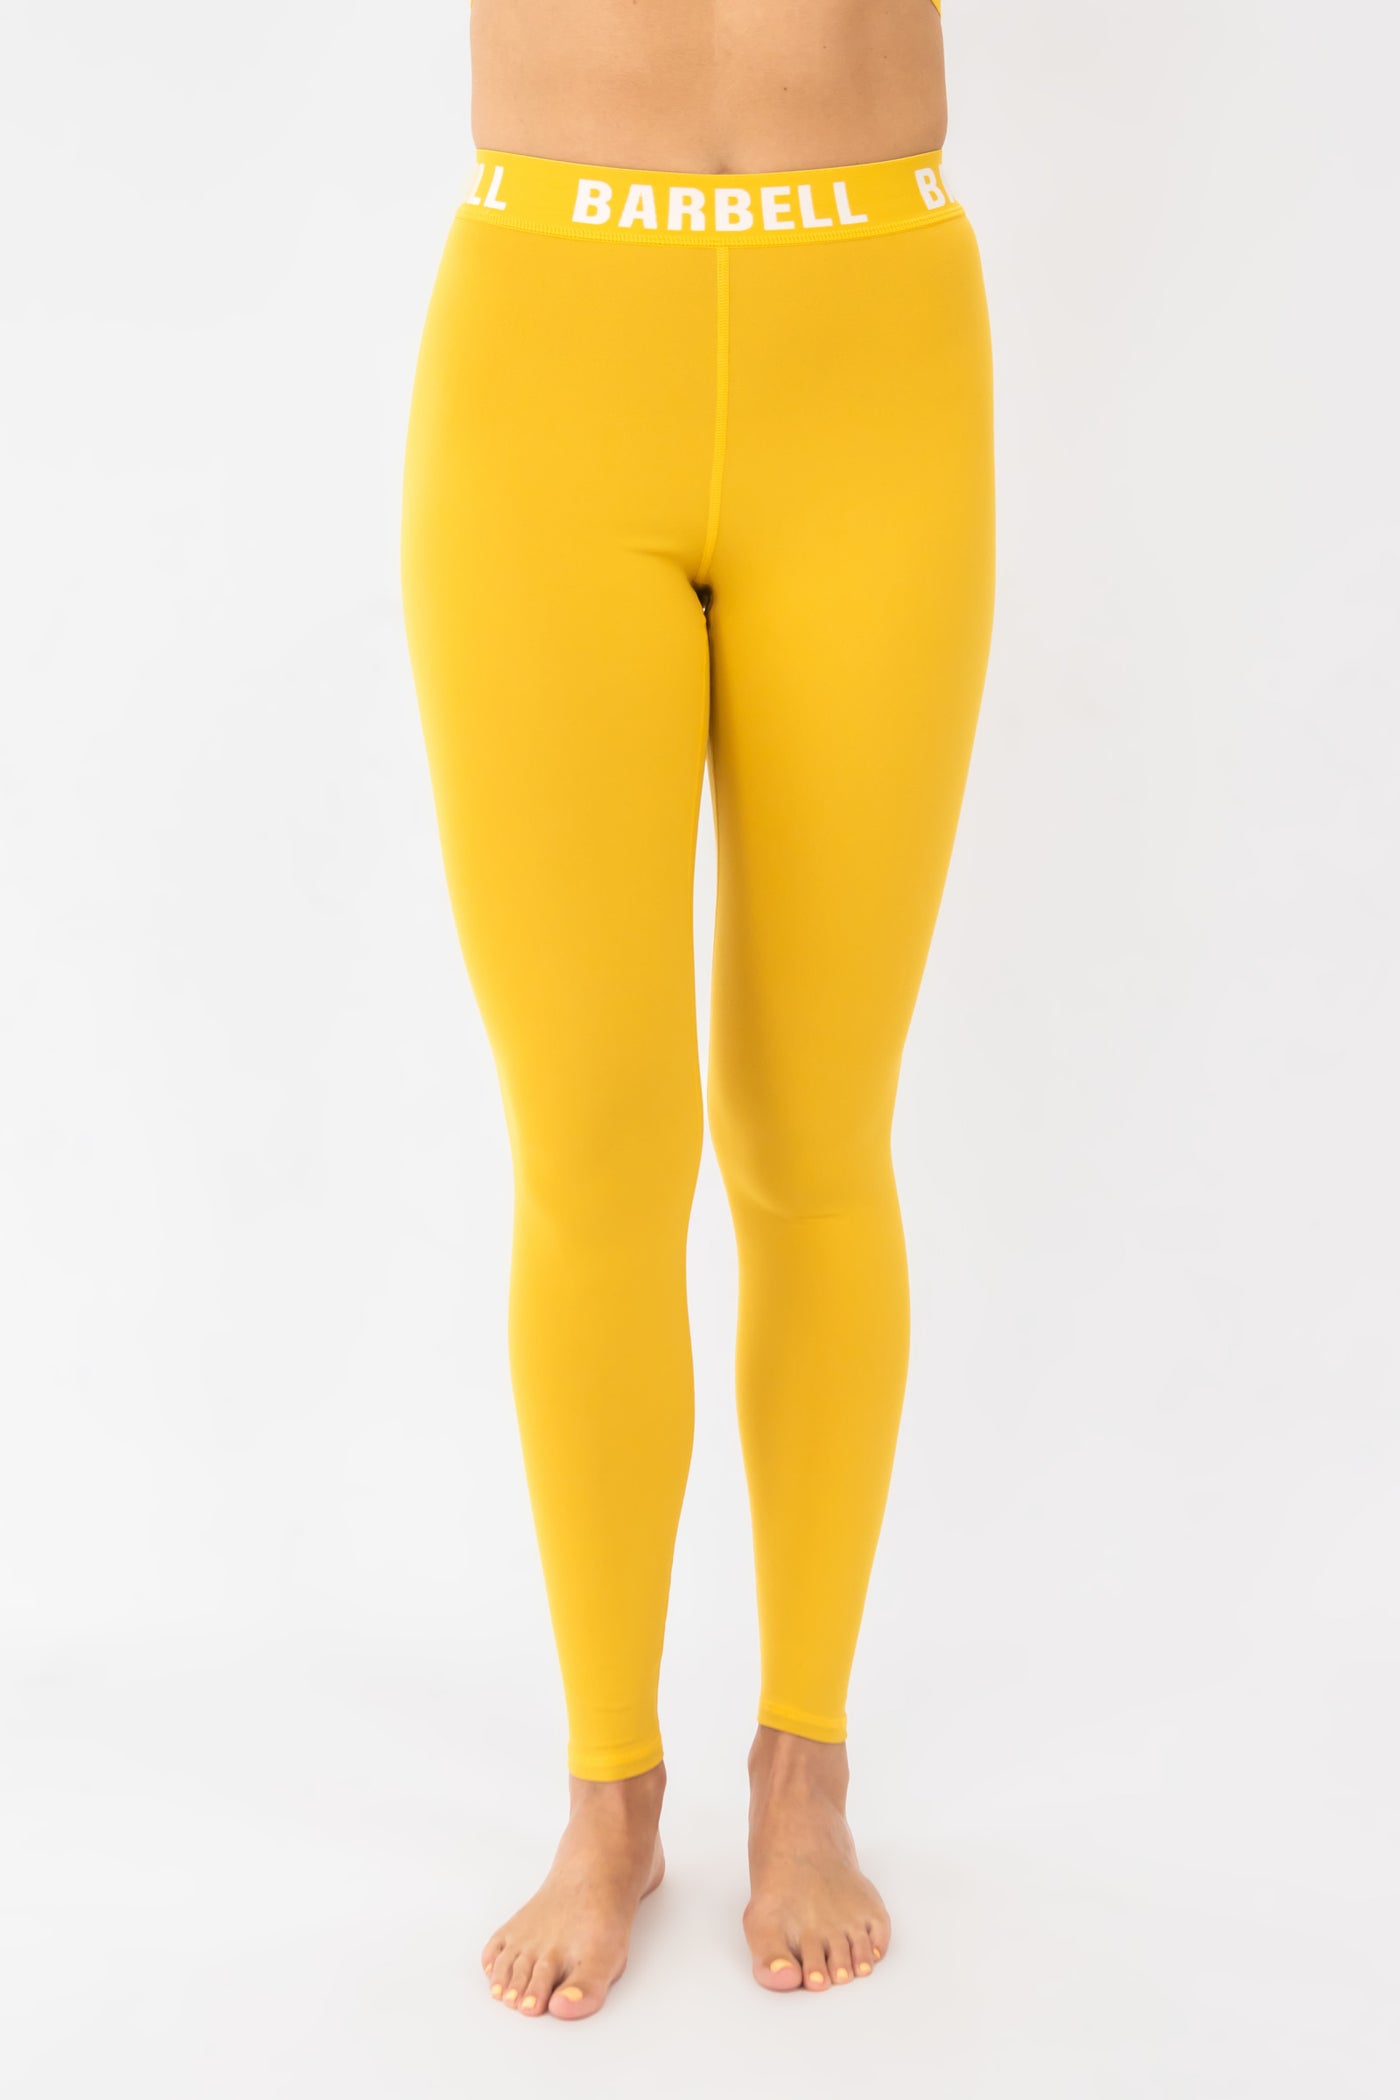 Barbell Barbell Leggings-daffodil - photo from front in focus #color_daffodil